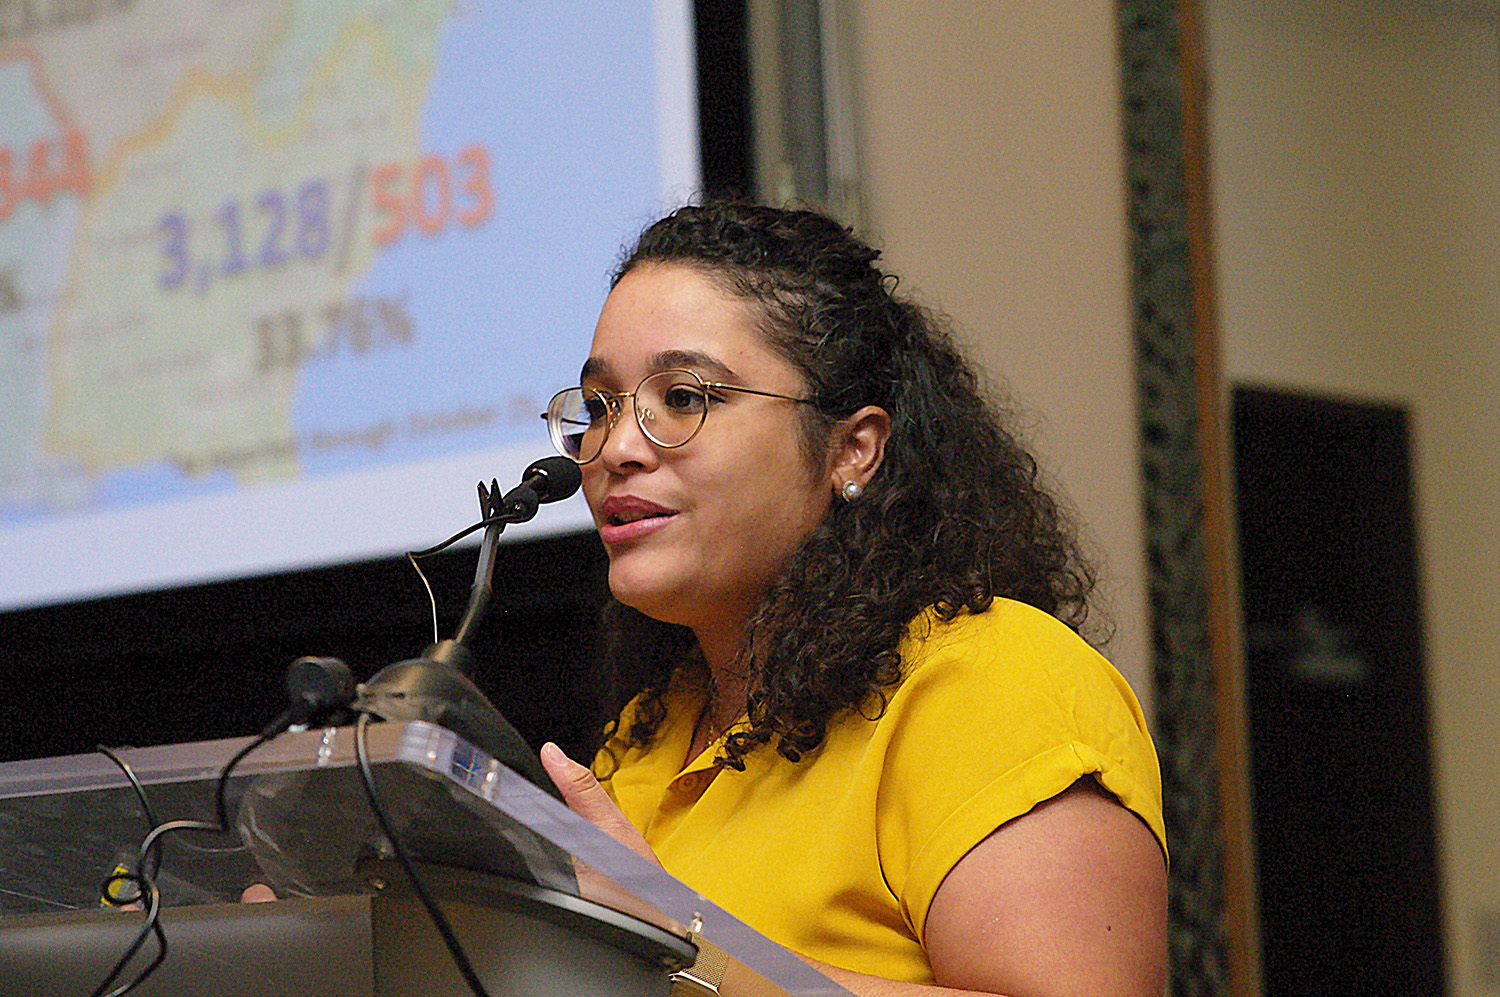 The Rev. Dorlimar Lebrón, director of International Relations for Wespath, shared the figures about the disaffiliations and closures of churches that have been taking place since 2019. Photo by the Rev. Gustavo Vasquez, UM News.